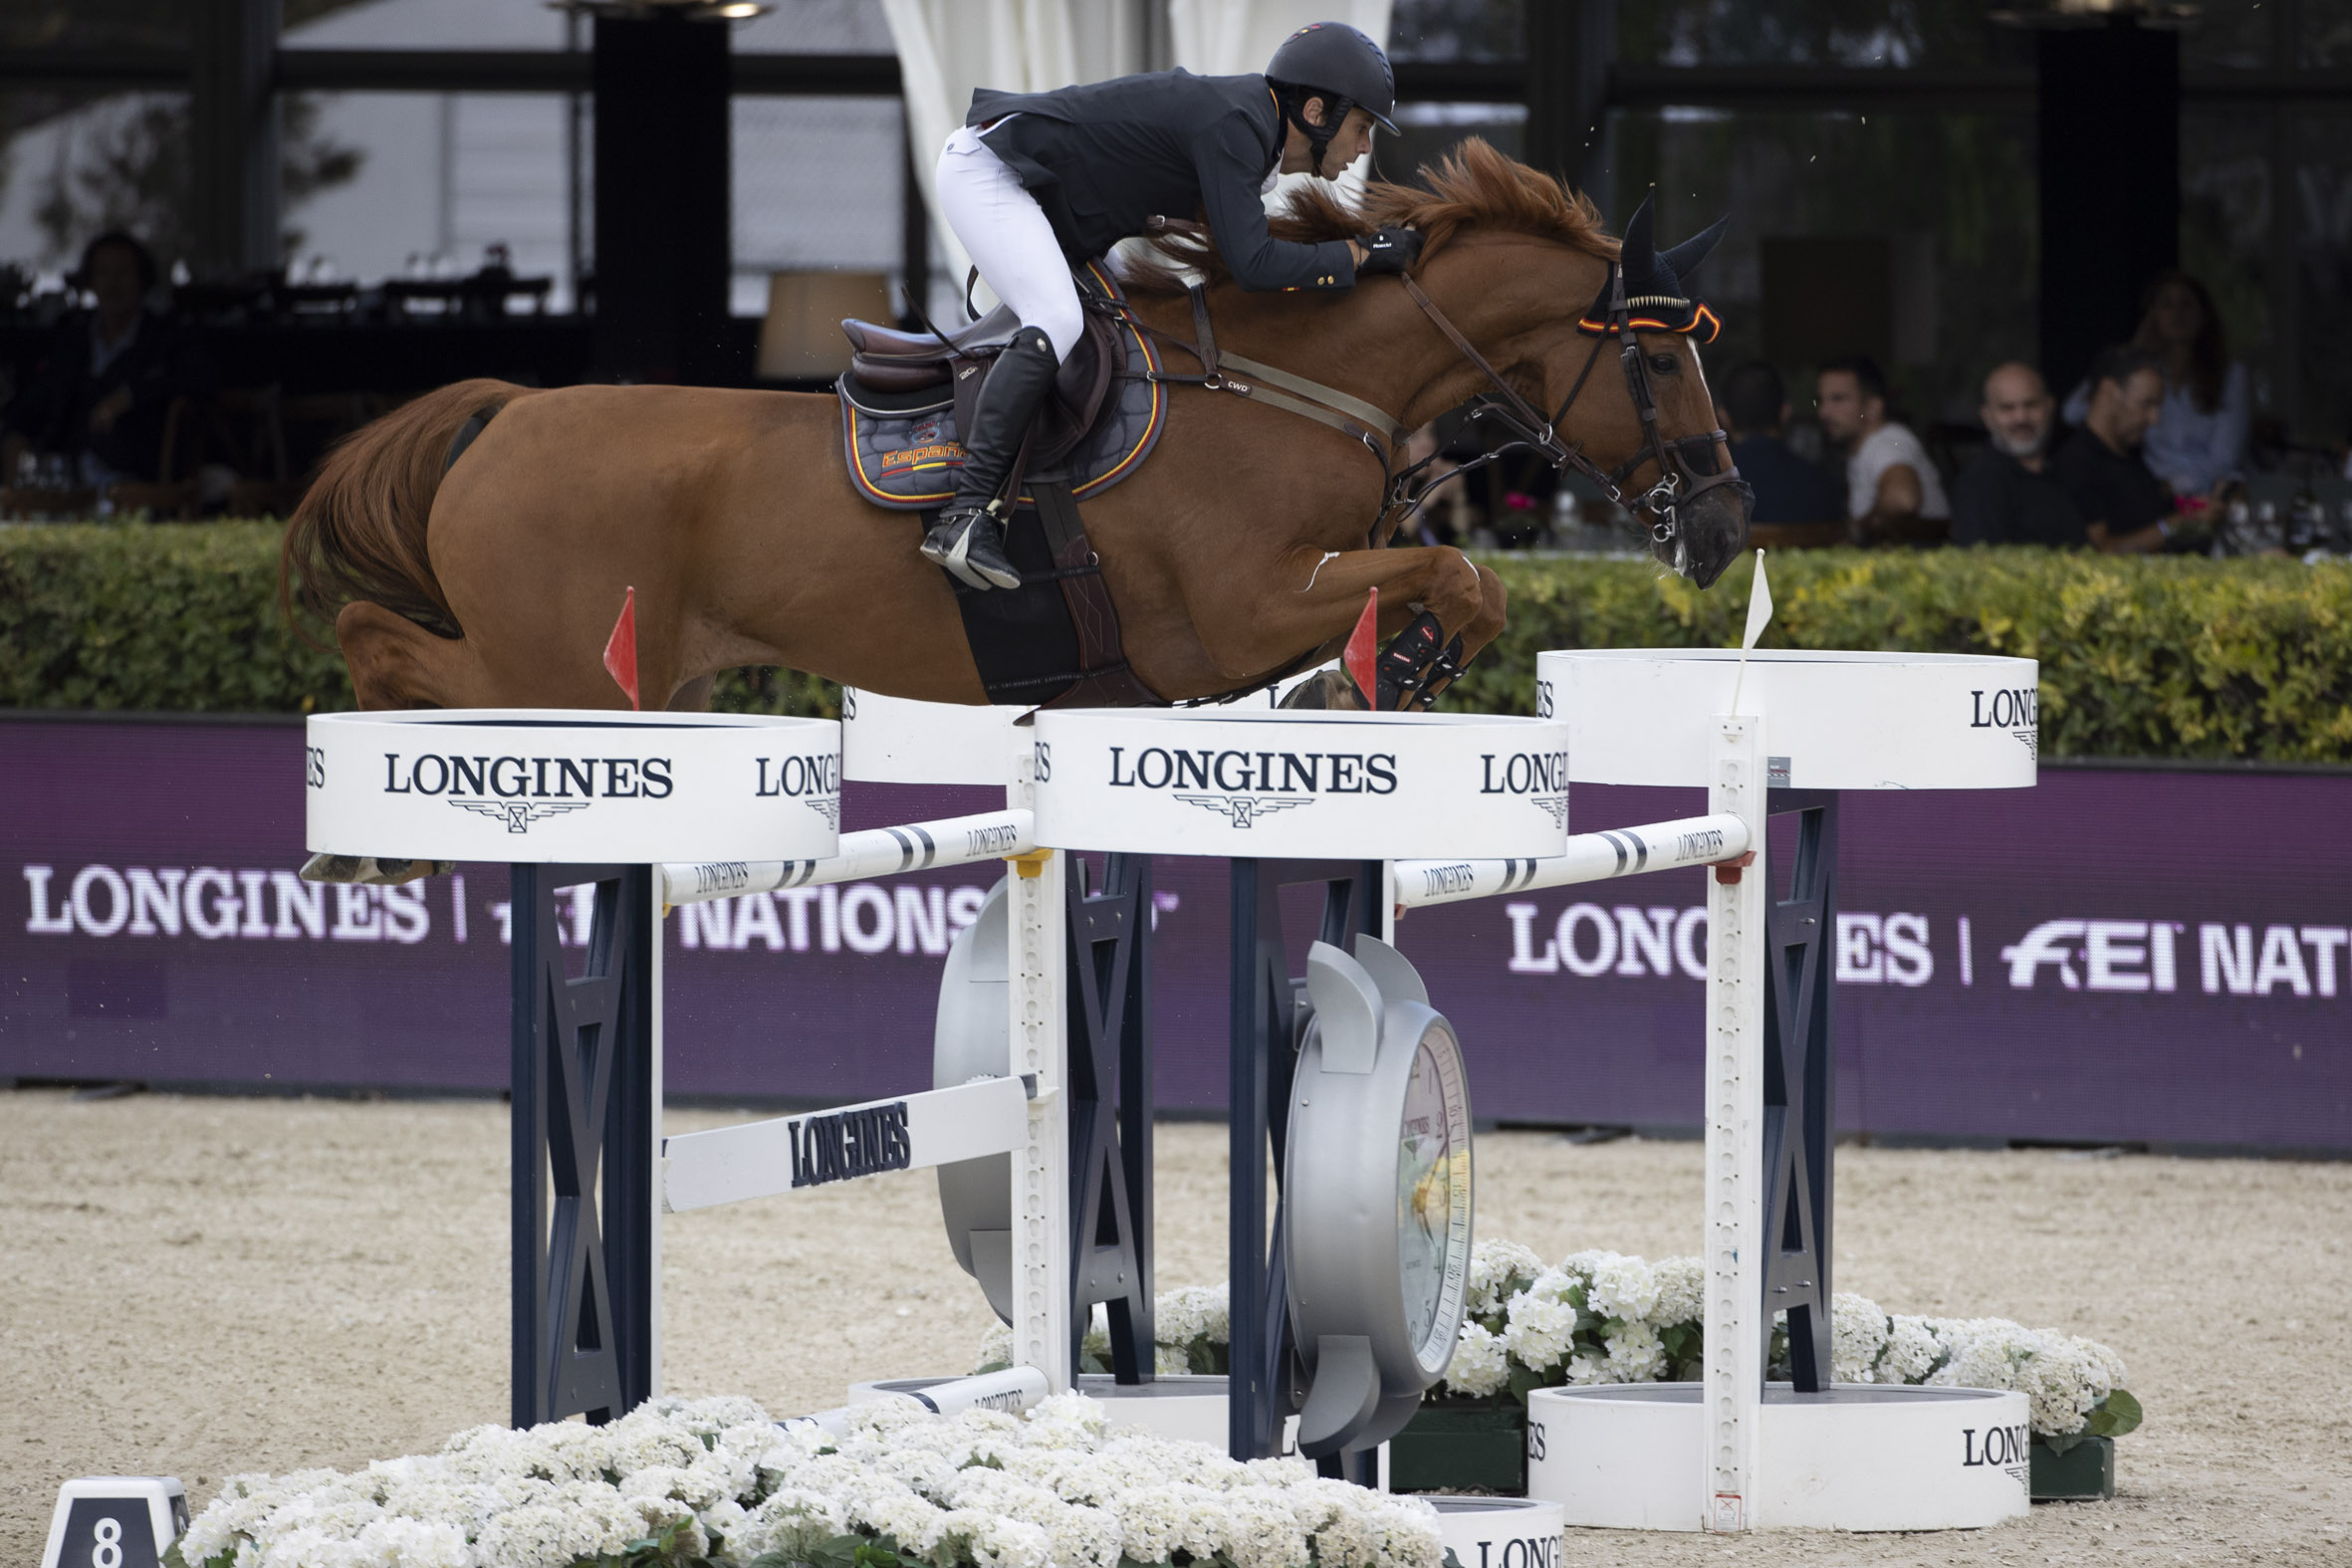 Spain qualifies for the Longines FEI Jumping Nations Cup Final